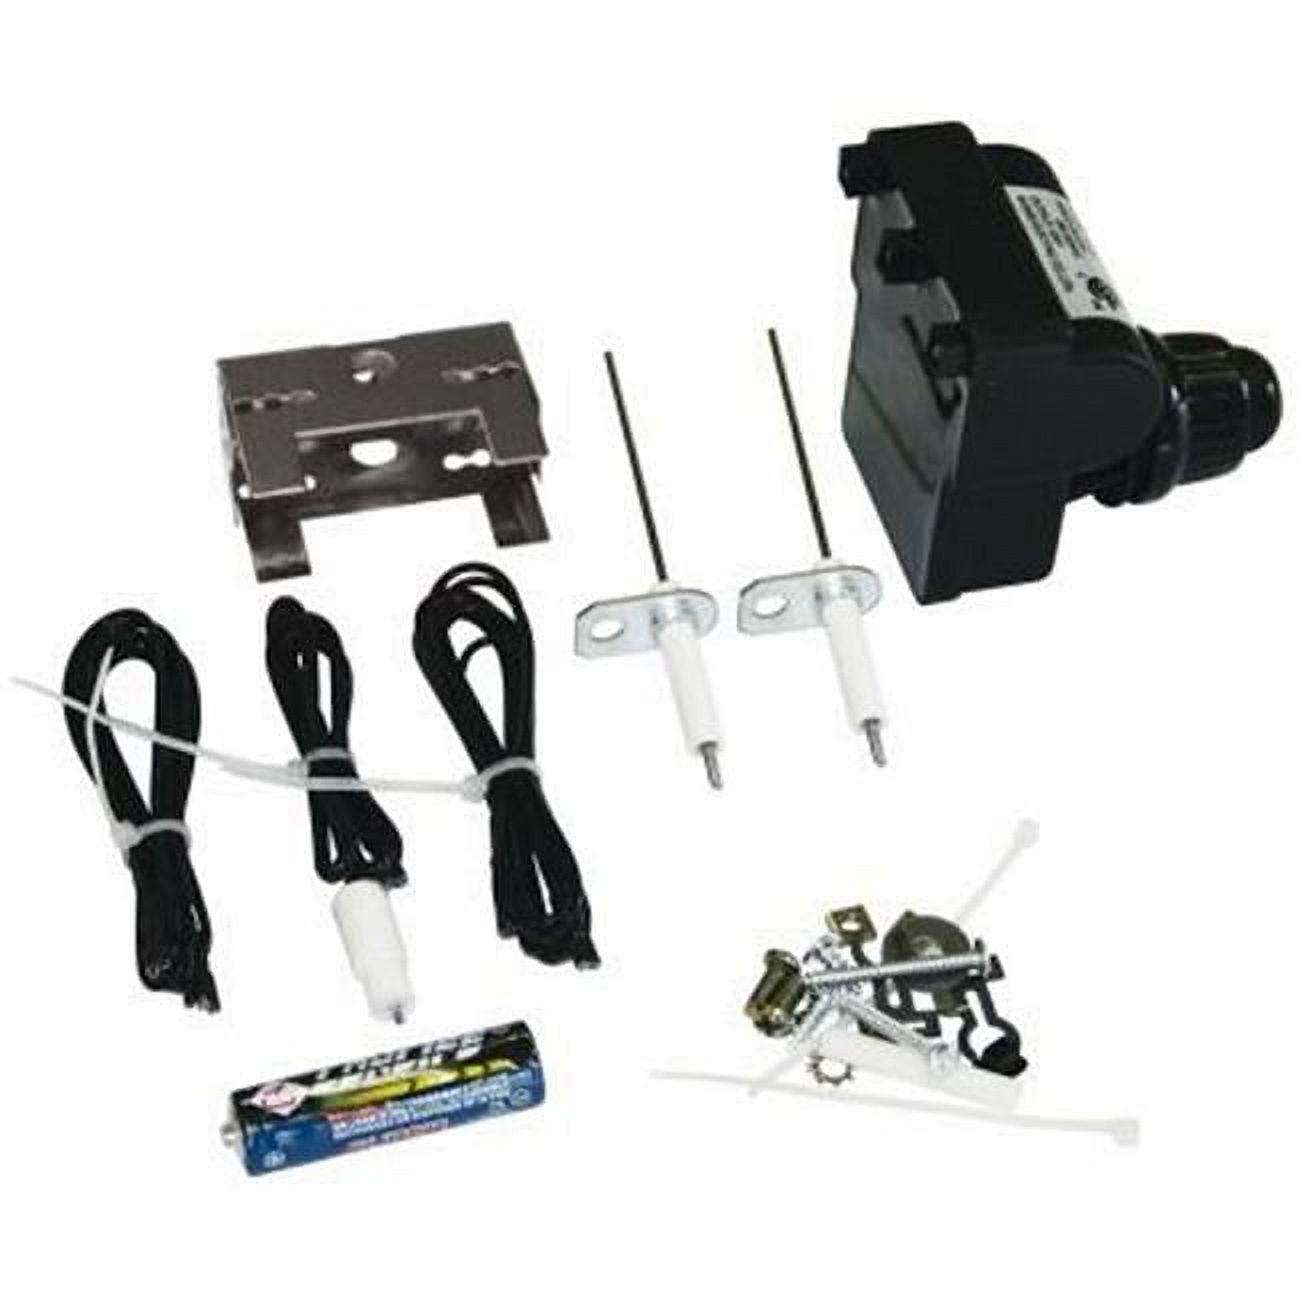 GrillPro Universal Gas Grill Electronic Push Button Replacement Igniter Kit - image 1 of 1